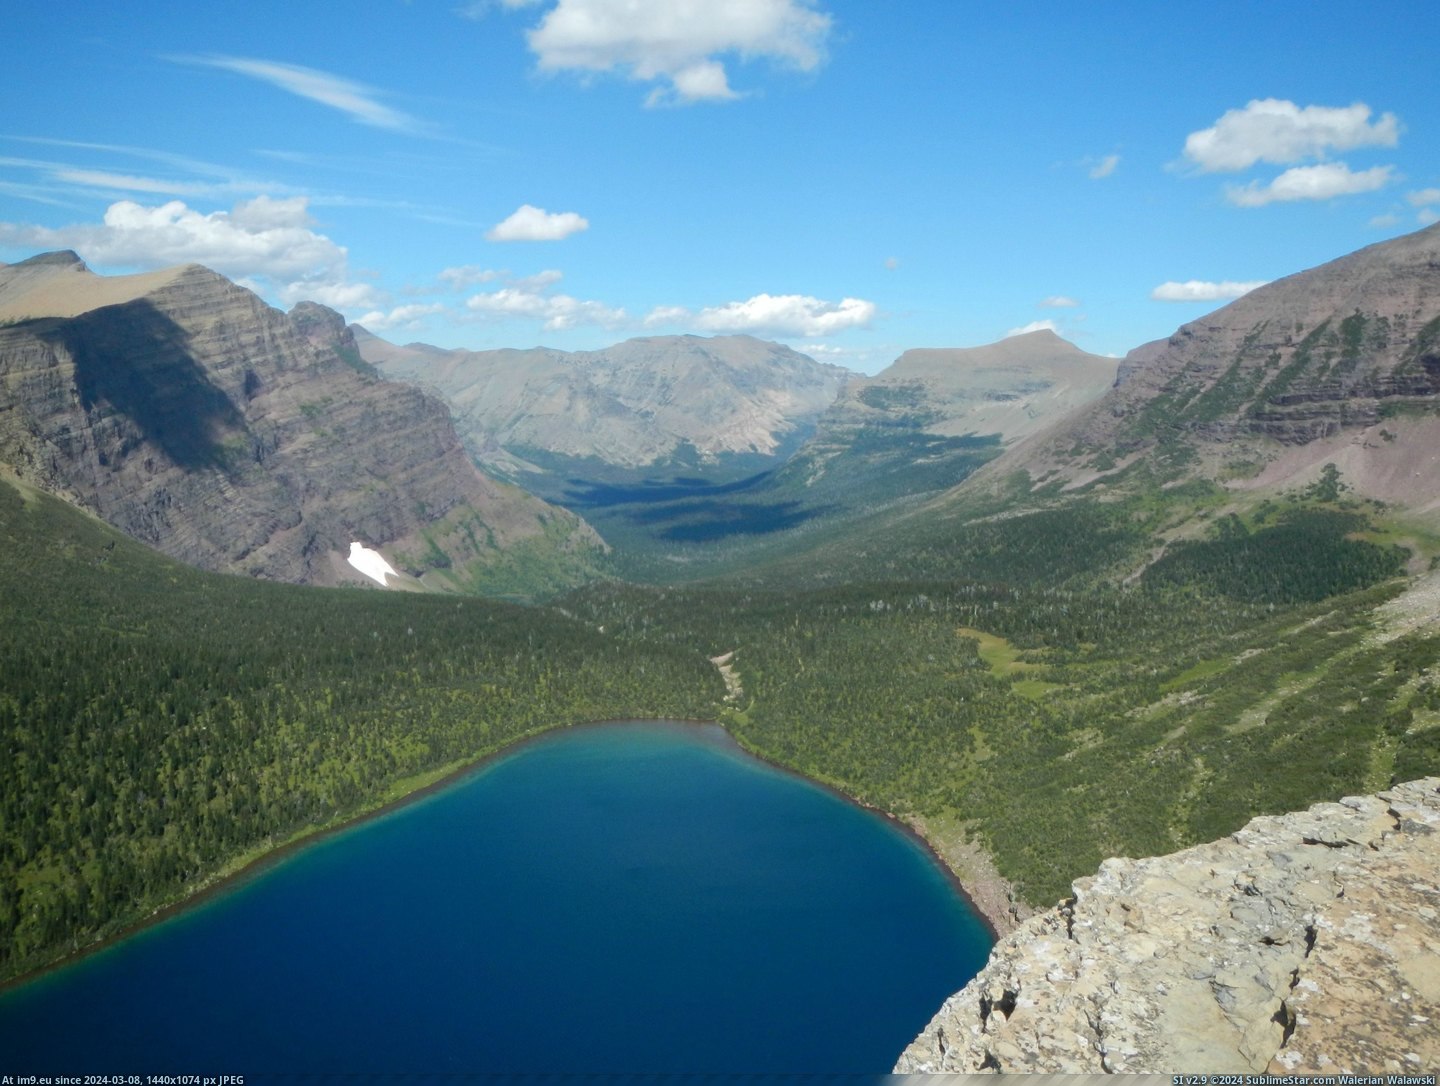 #Park #National #Lake #Continental #Divide #2764x2073 #Pitamakan #Glacier #Trail #Photograph [Earthporn] Photograph of Pitamakan lake taken near the Continental Divide Trail. Glacier National Park, MT [OC] [2764x2073] Pic. (Bild von album My r/EARTHPORN favs))